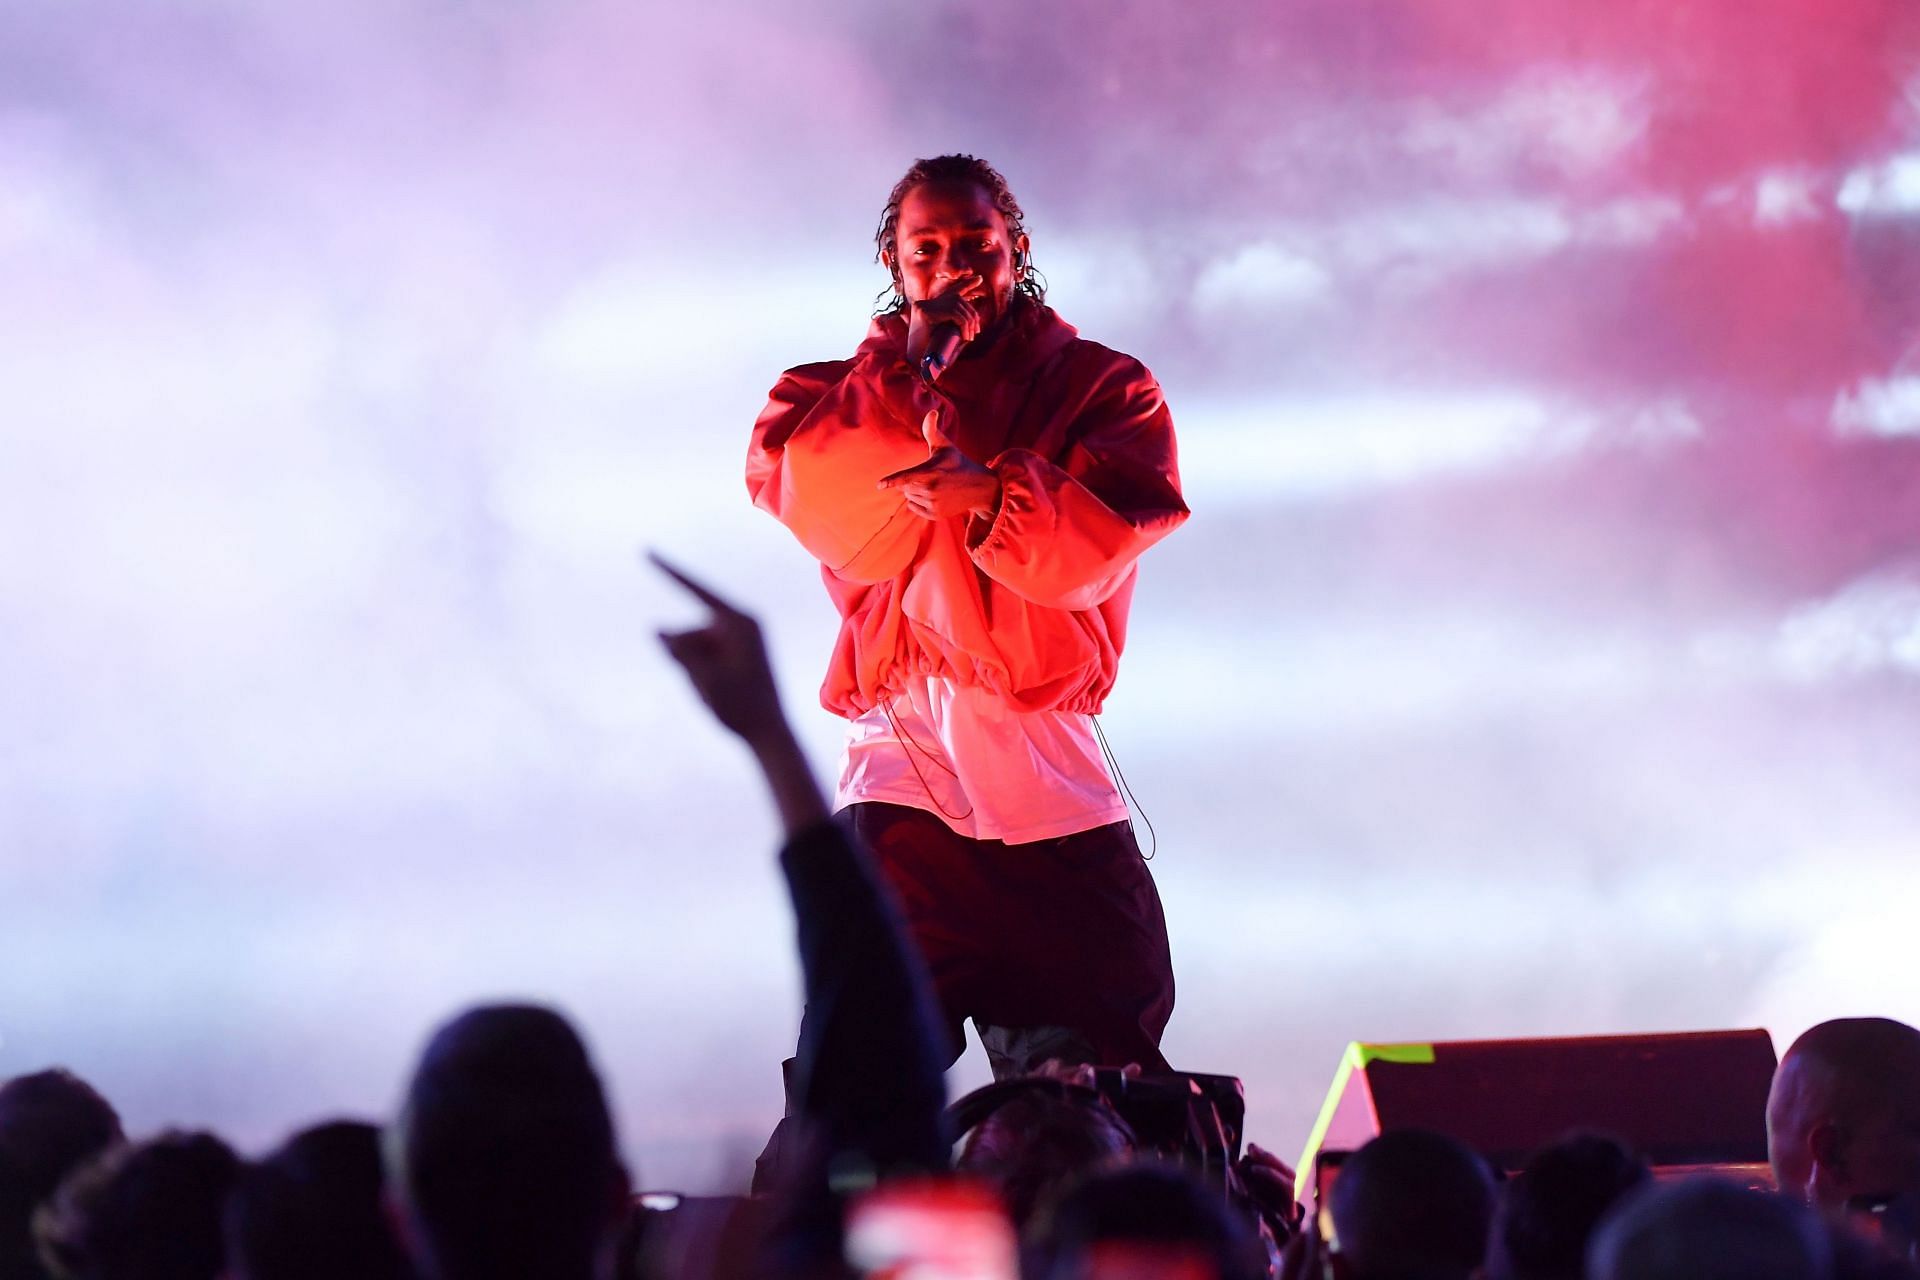 Kendrick Lamar Performance at the NBA on TNT American Express Road Show Stage